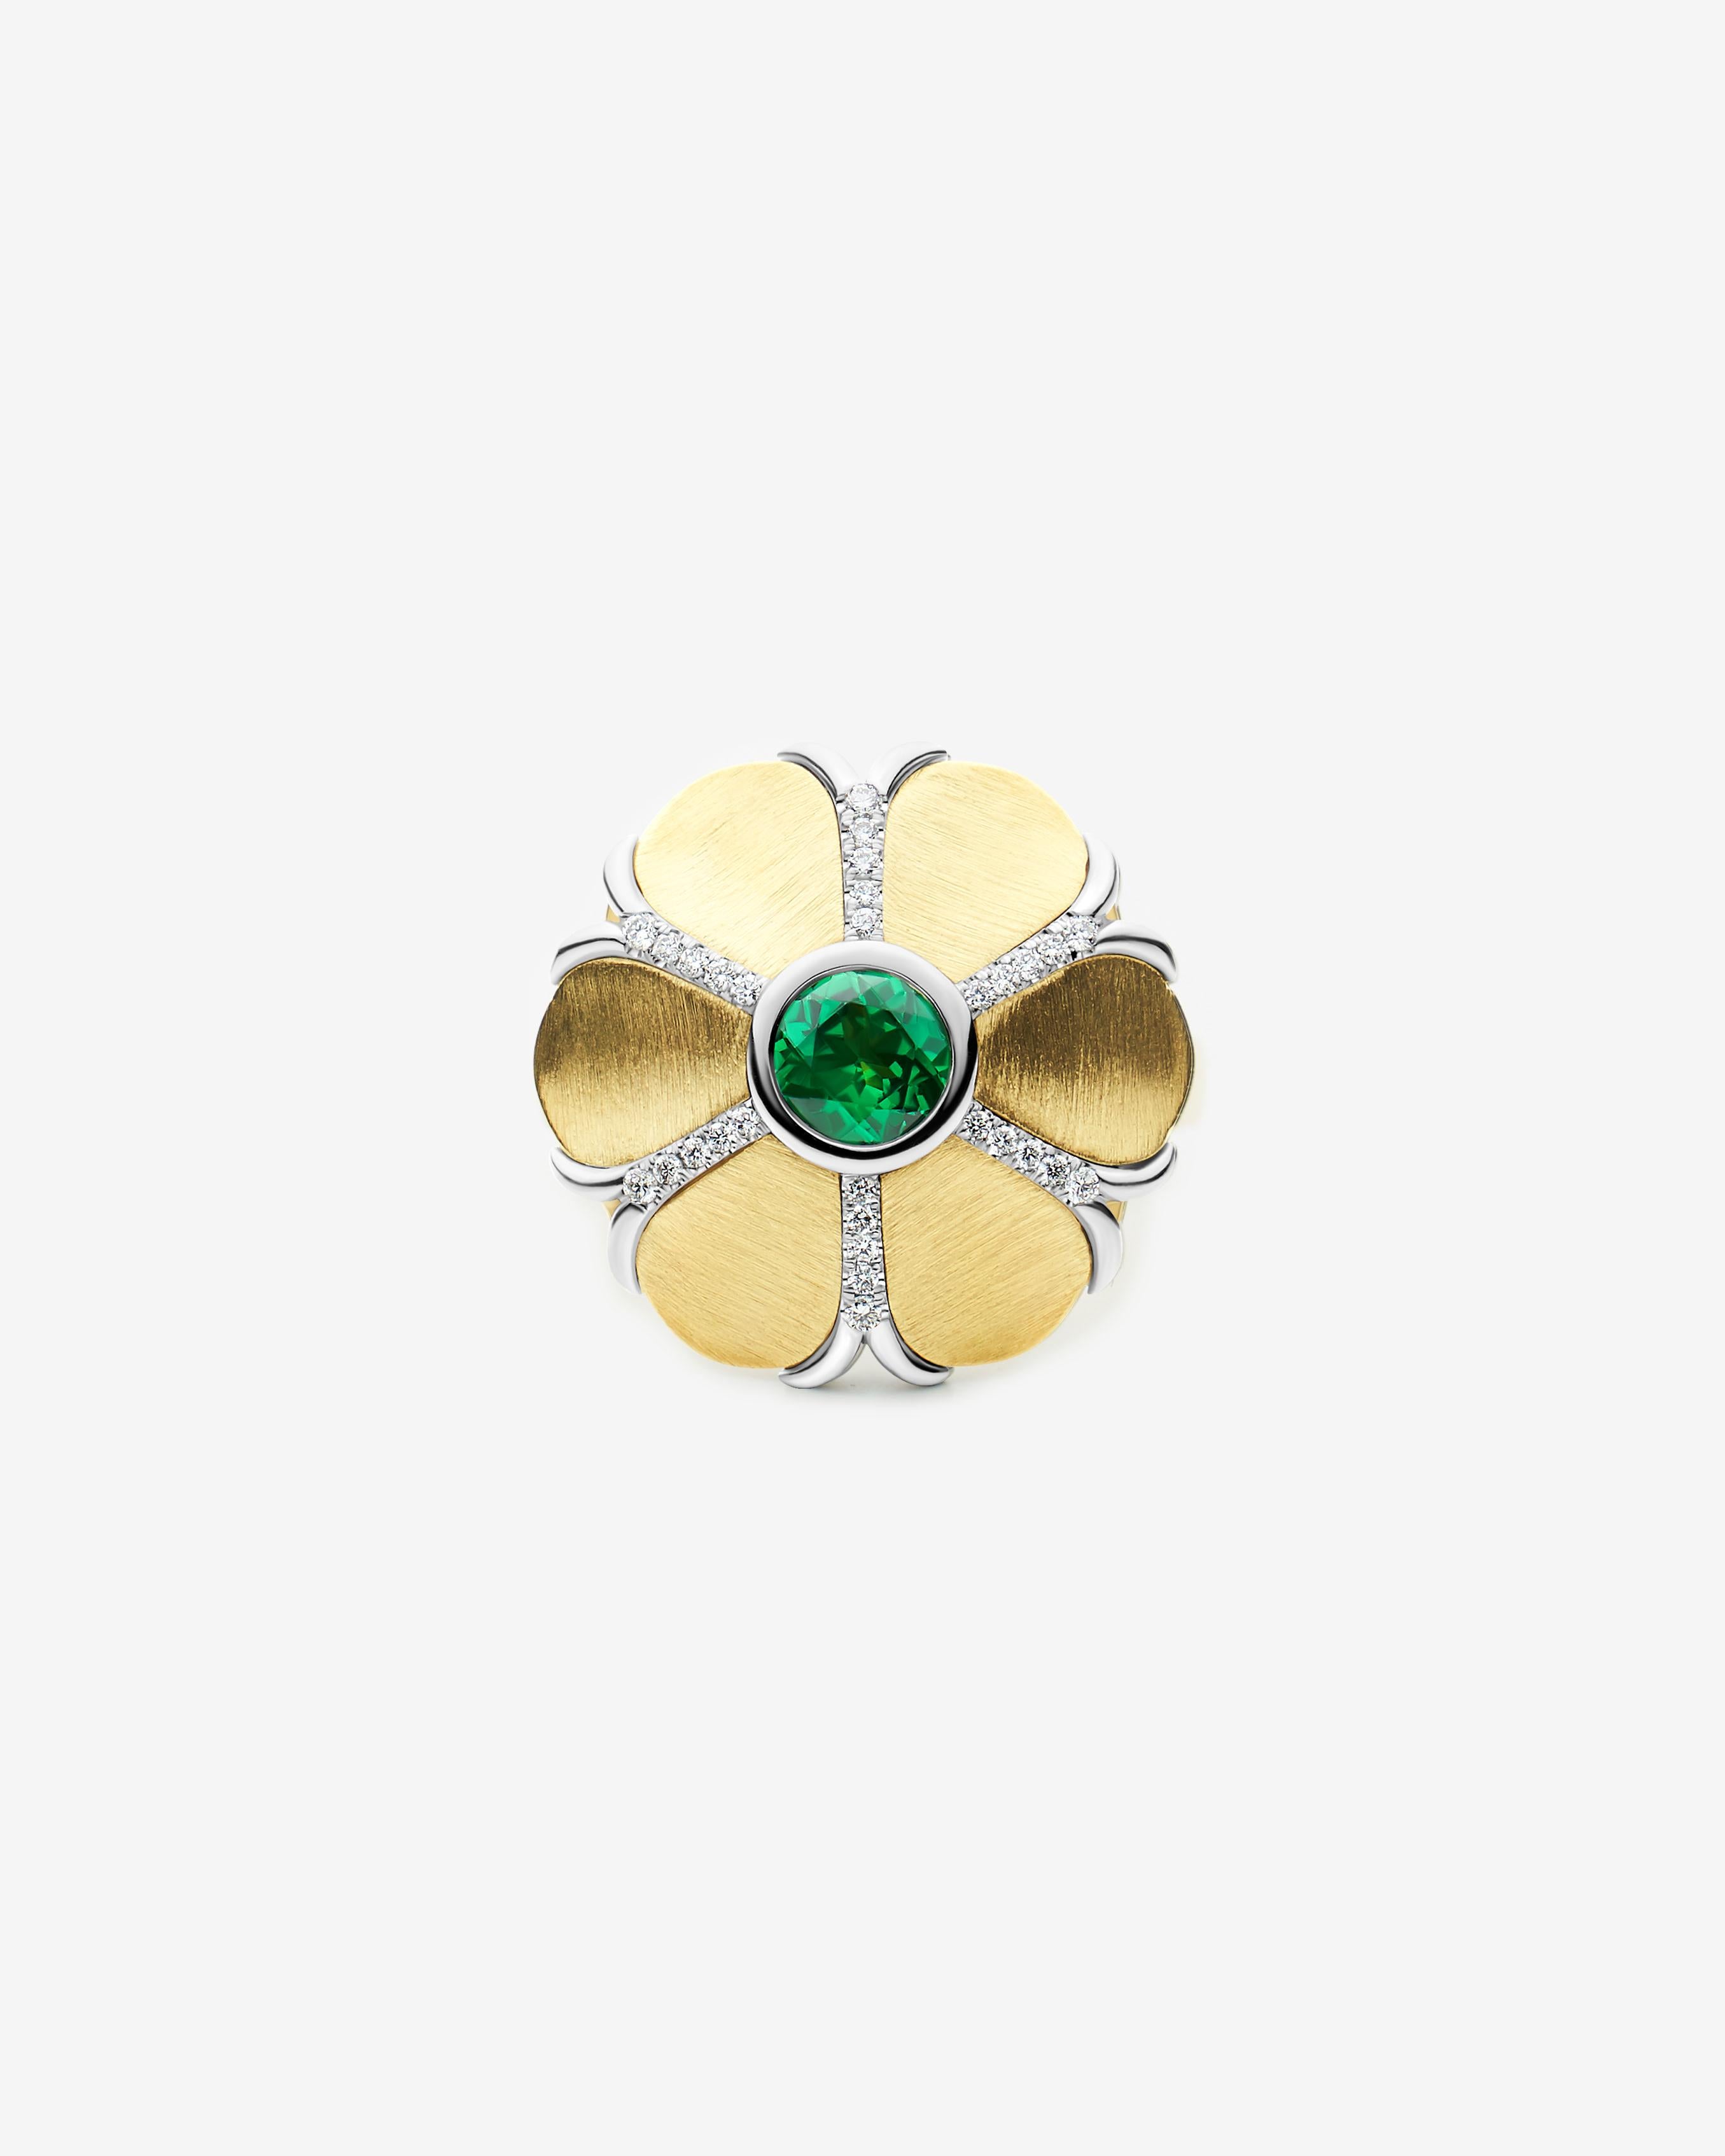 For Sale:  18k Yellow Gold and Platinum Diamond Cocktail Ring with 0.80 Carat Green Garnet 2